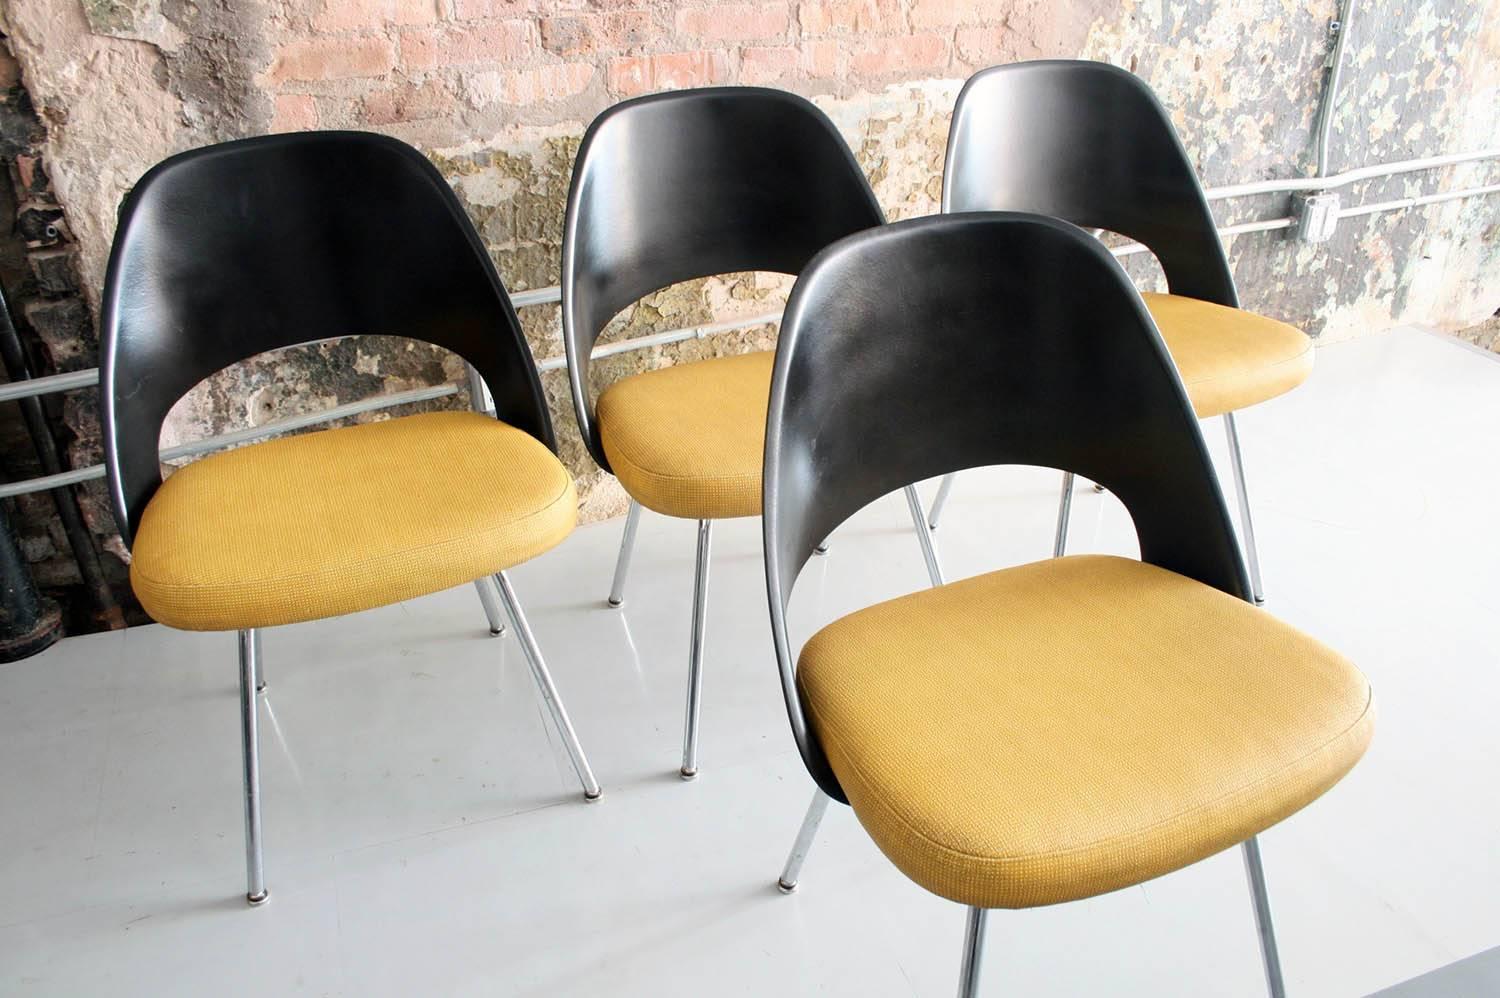 Mid-20th Century Set of Four Executive Chairs by Eero Saarinen for Knoll in Original Condition